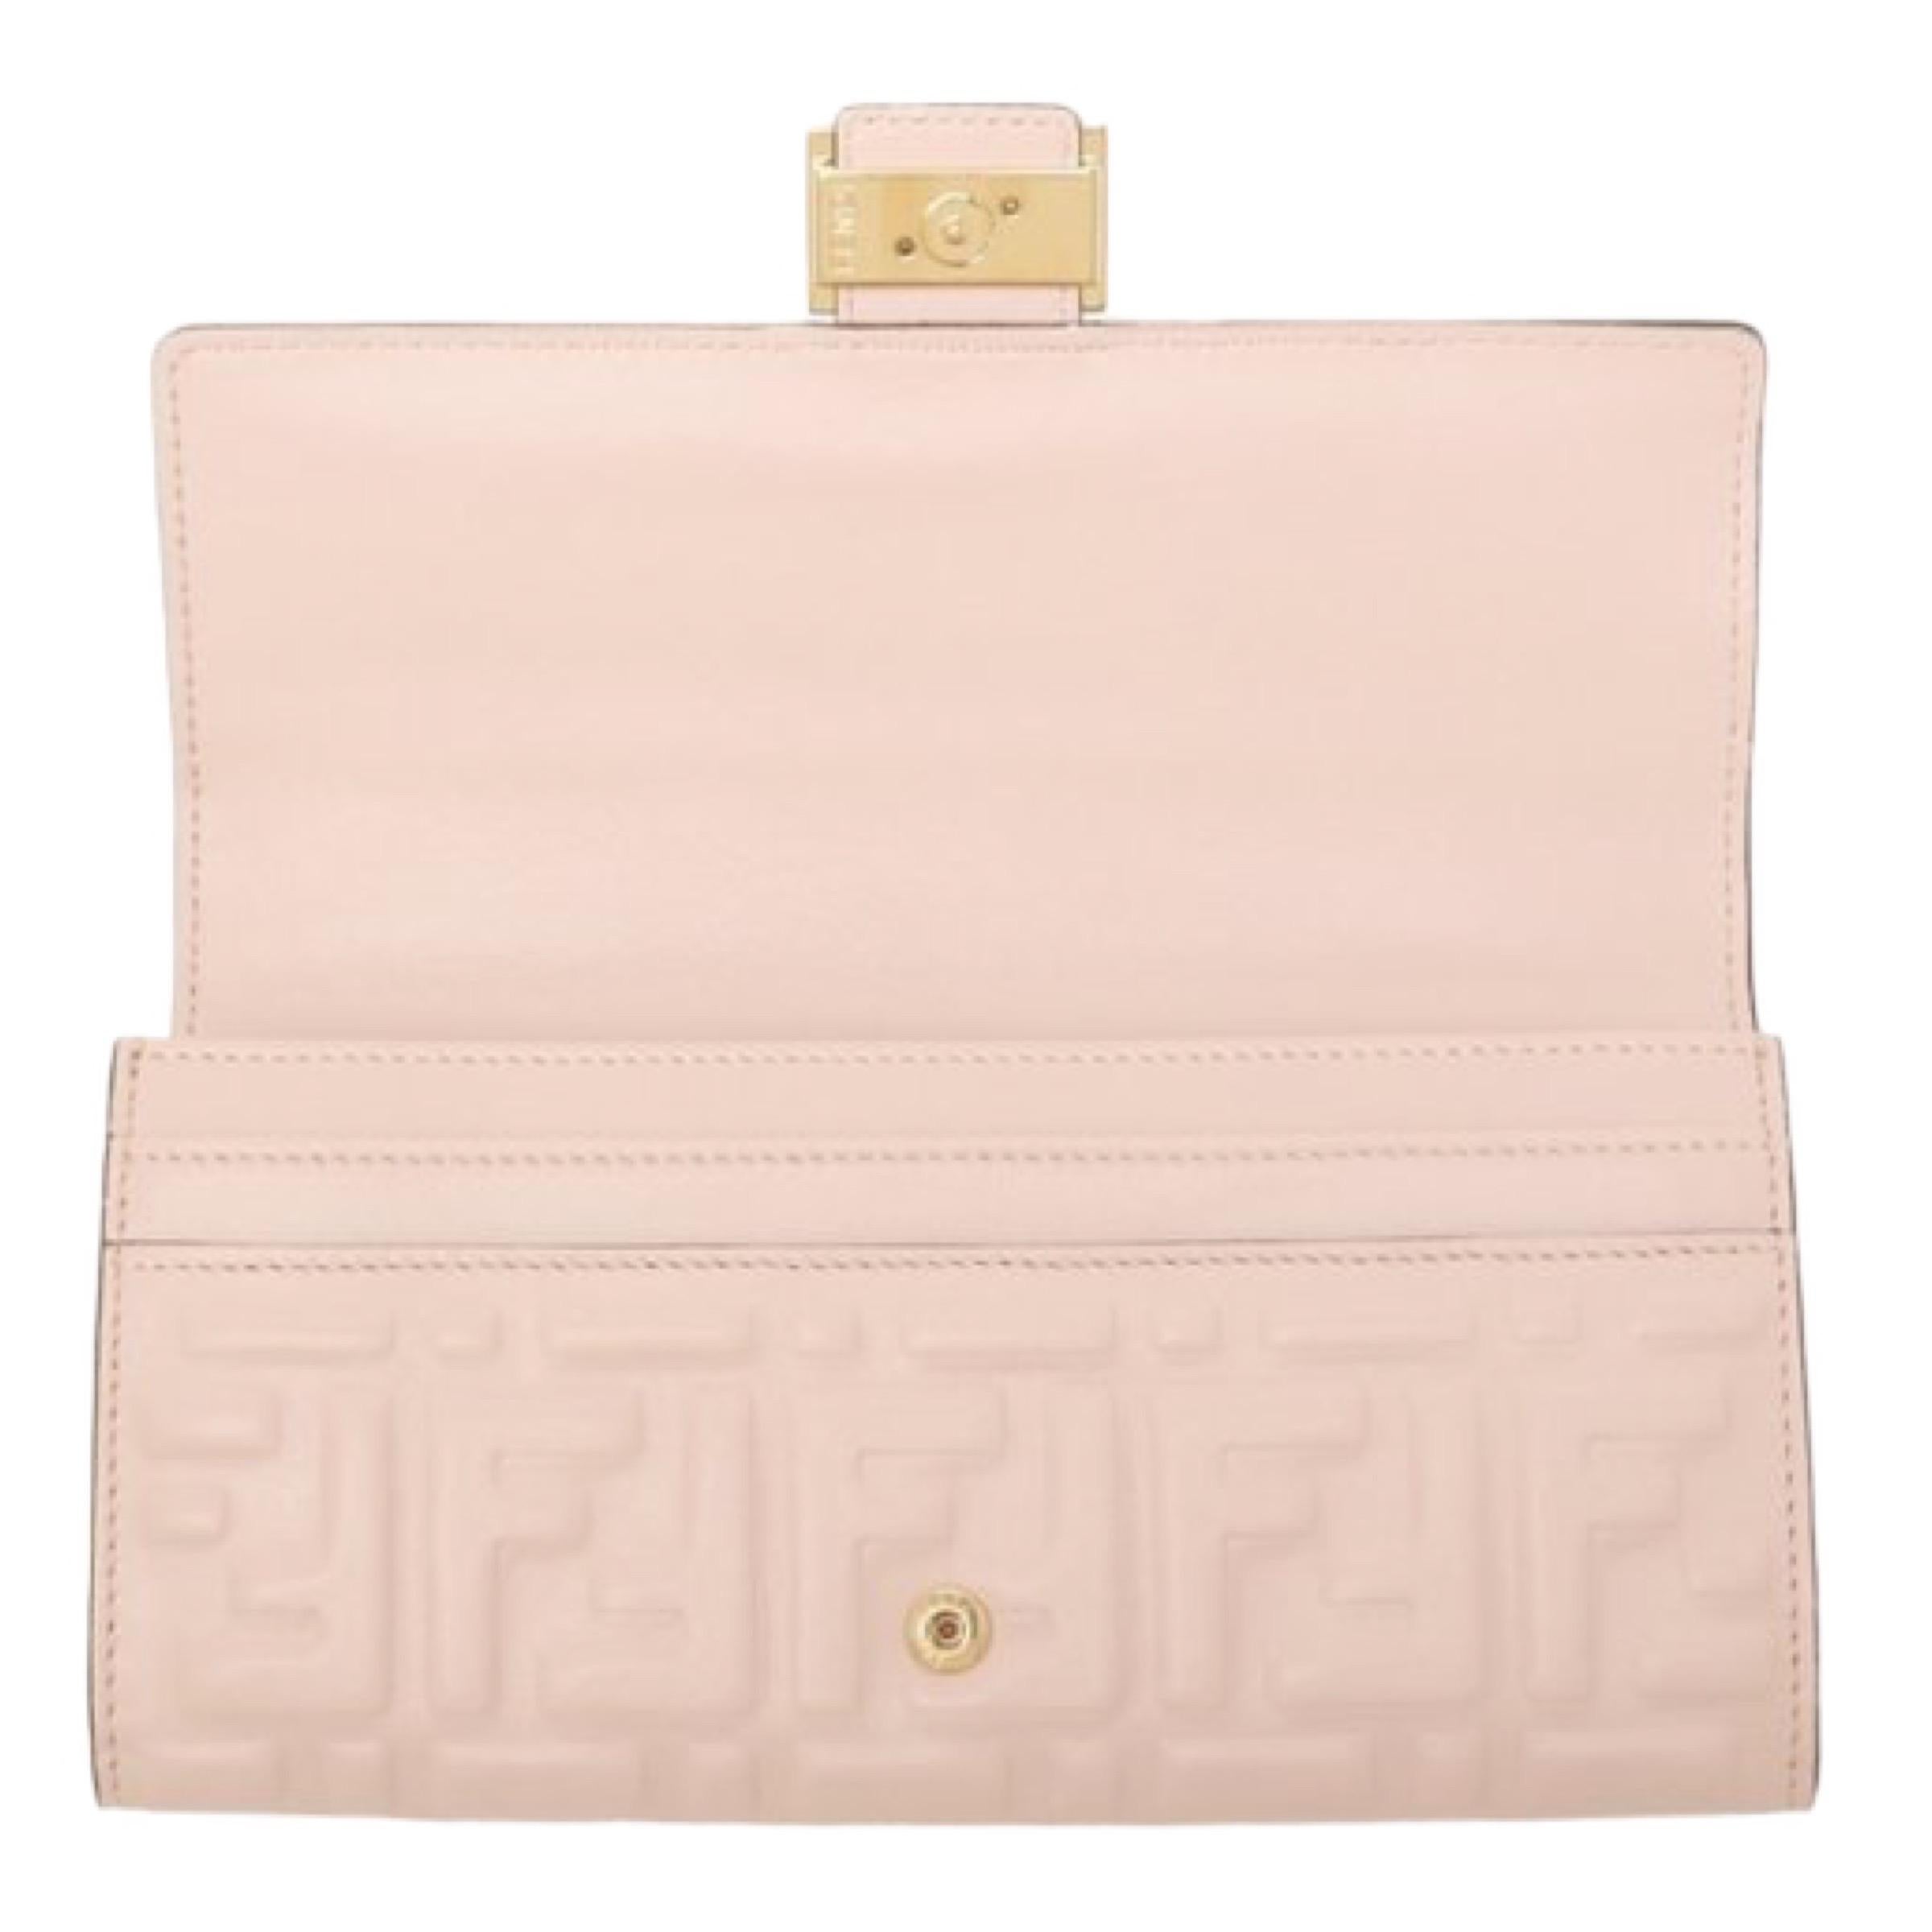 Women's NEW Fendi Candy Pink Baguette FF Monogram Leather Continental Wallet Clutch Bag For Sale